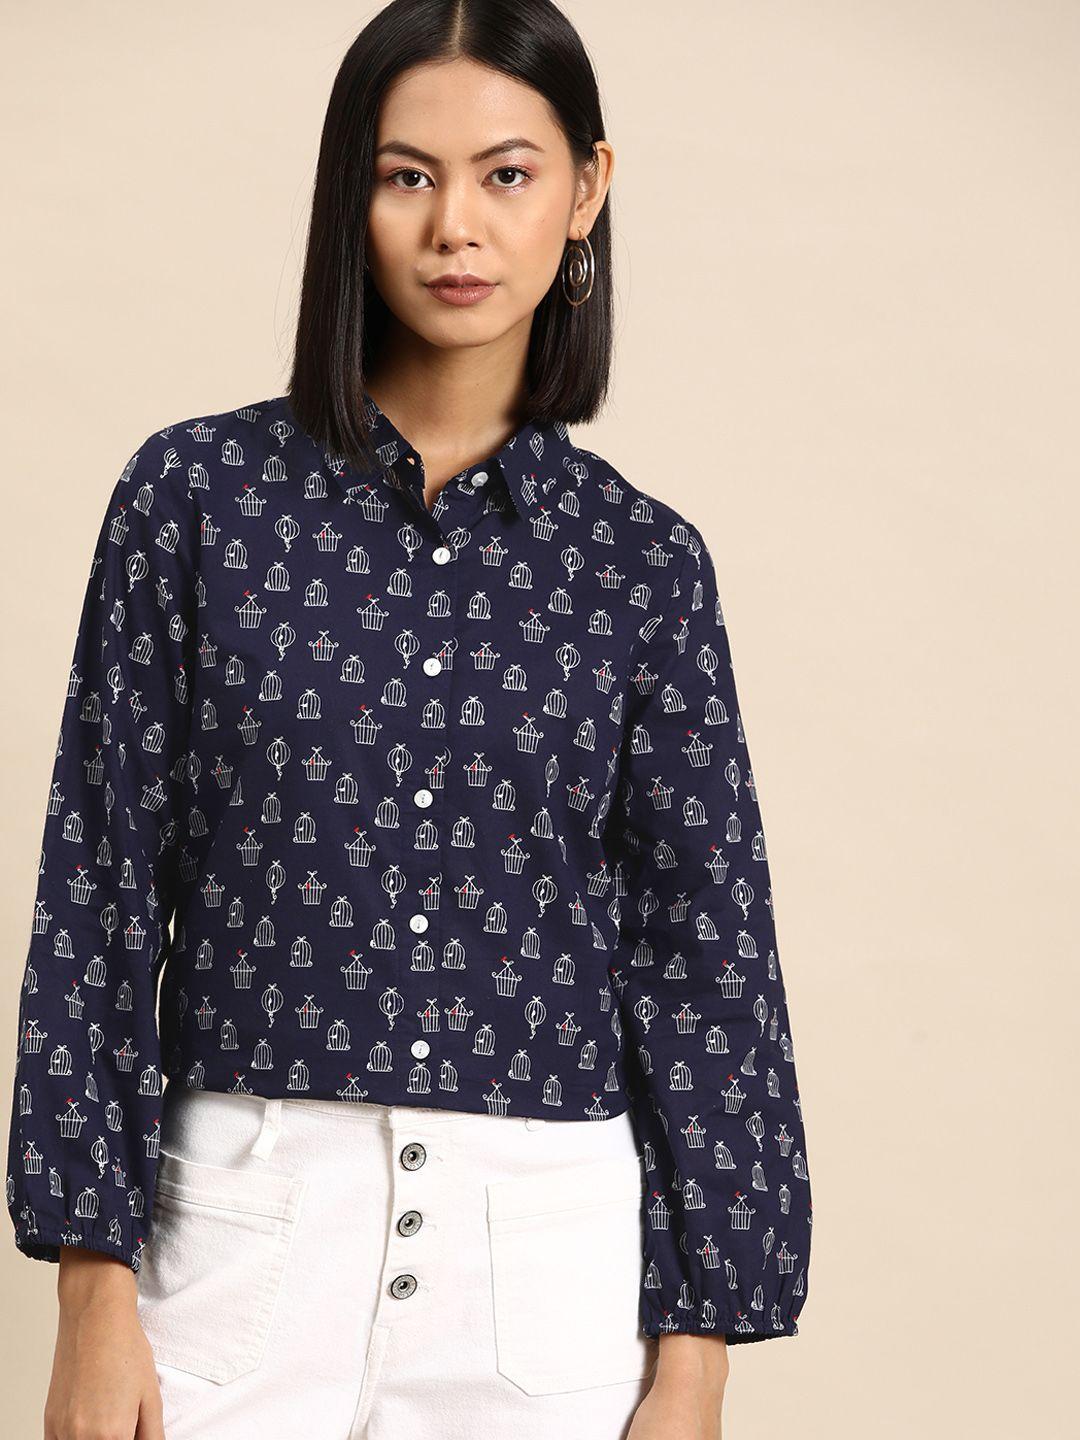 all about you women opaque printed casual shirt